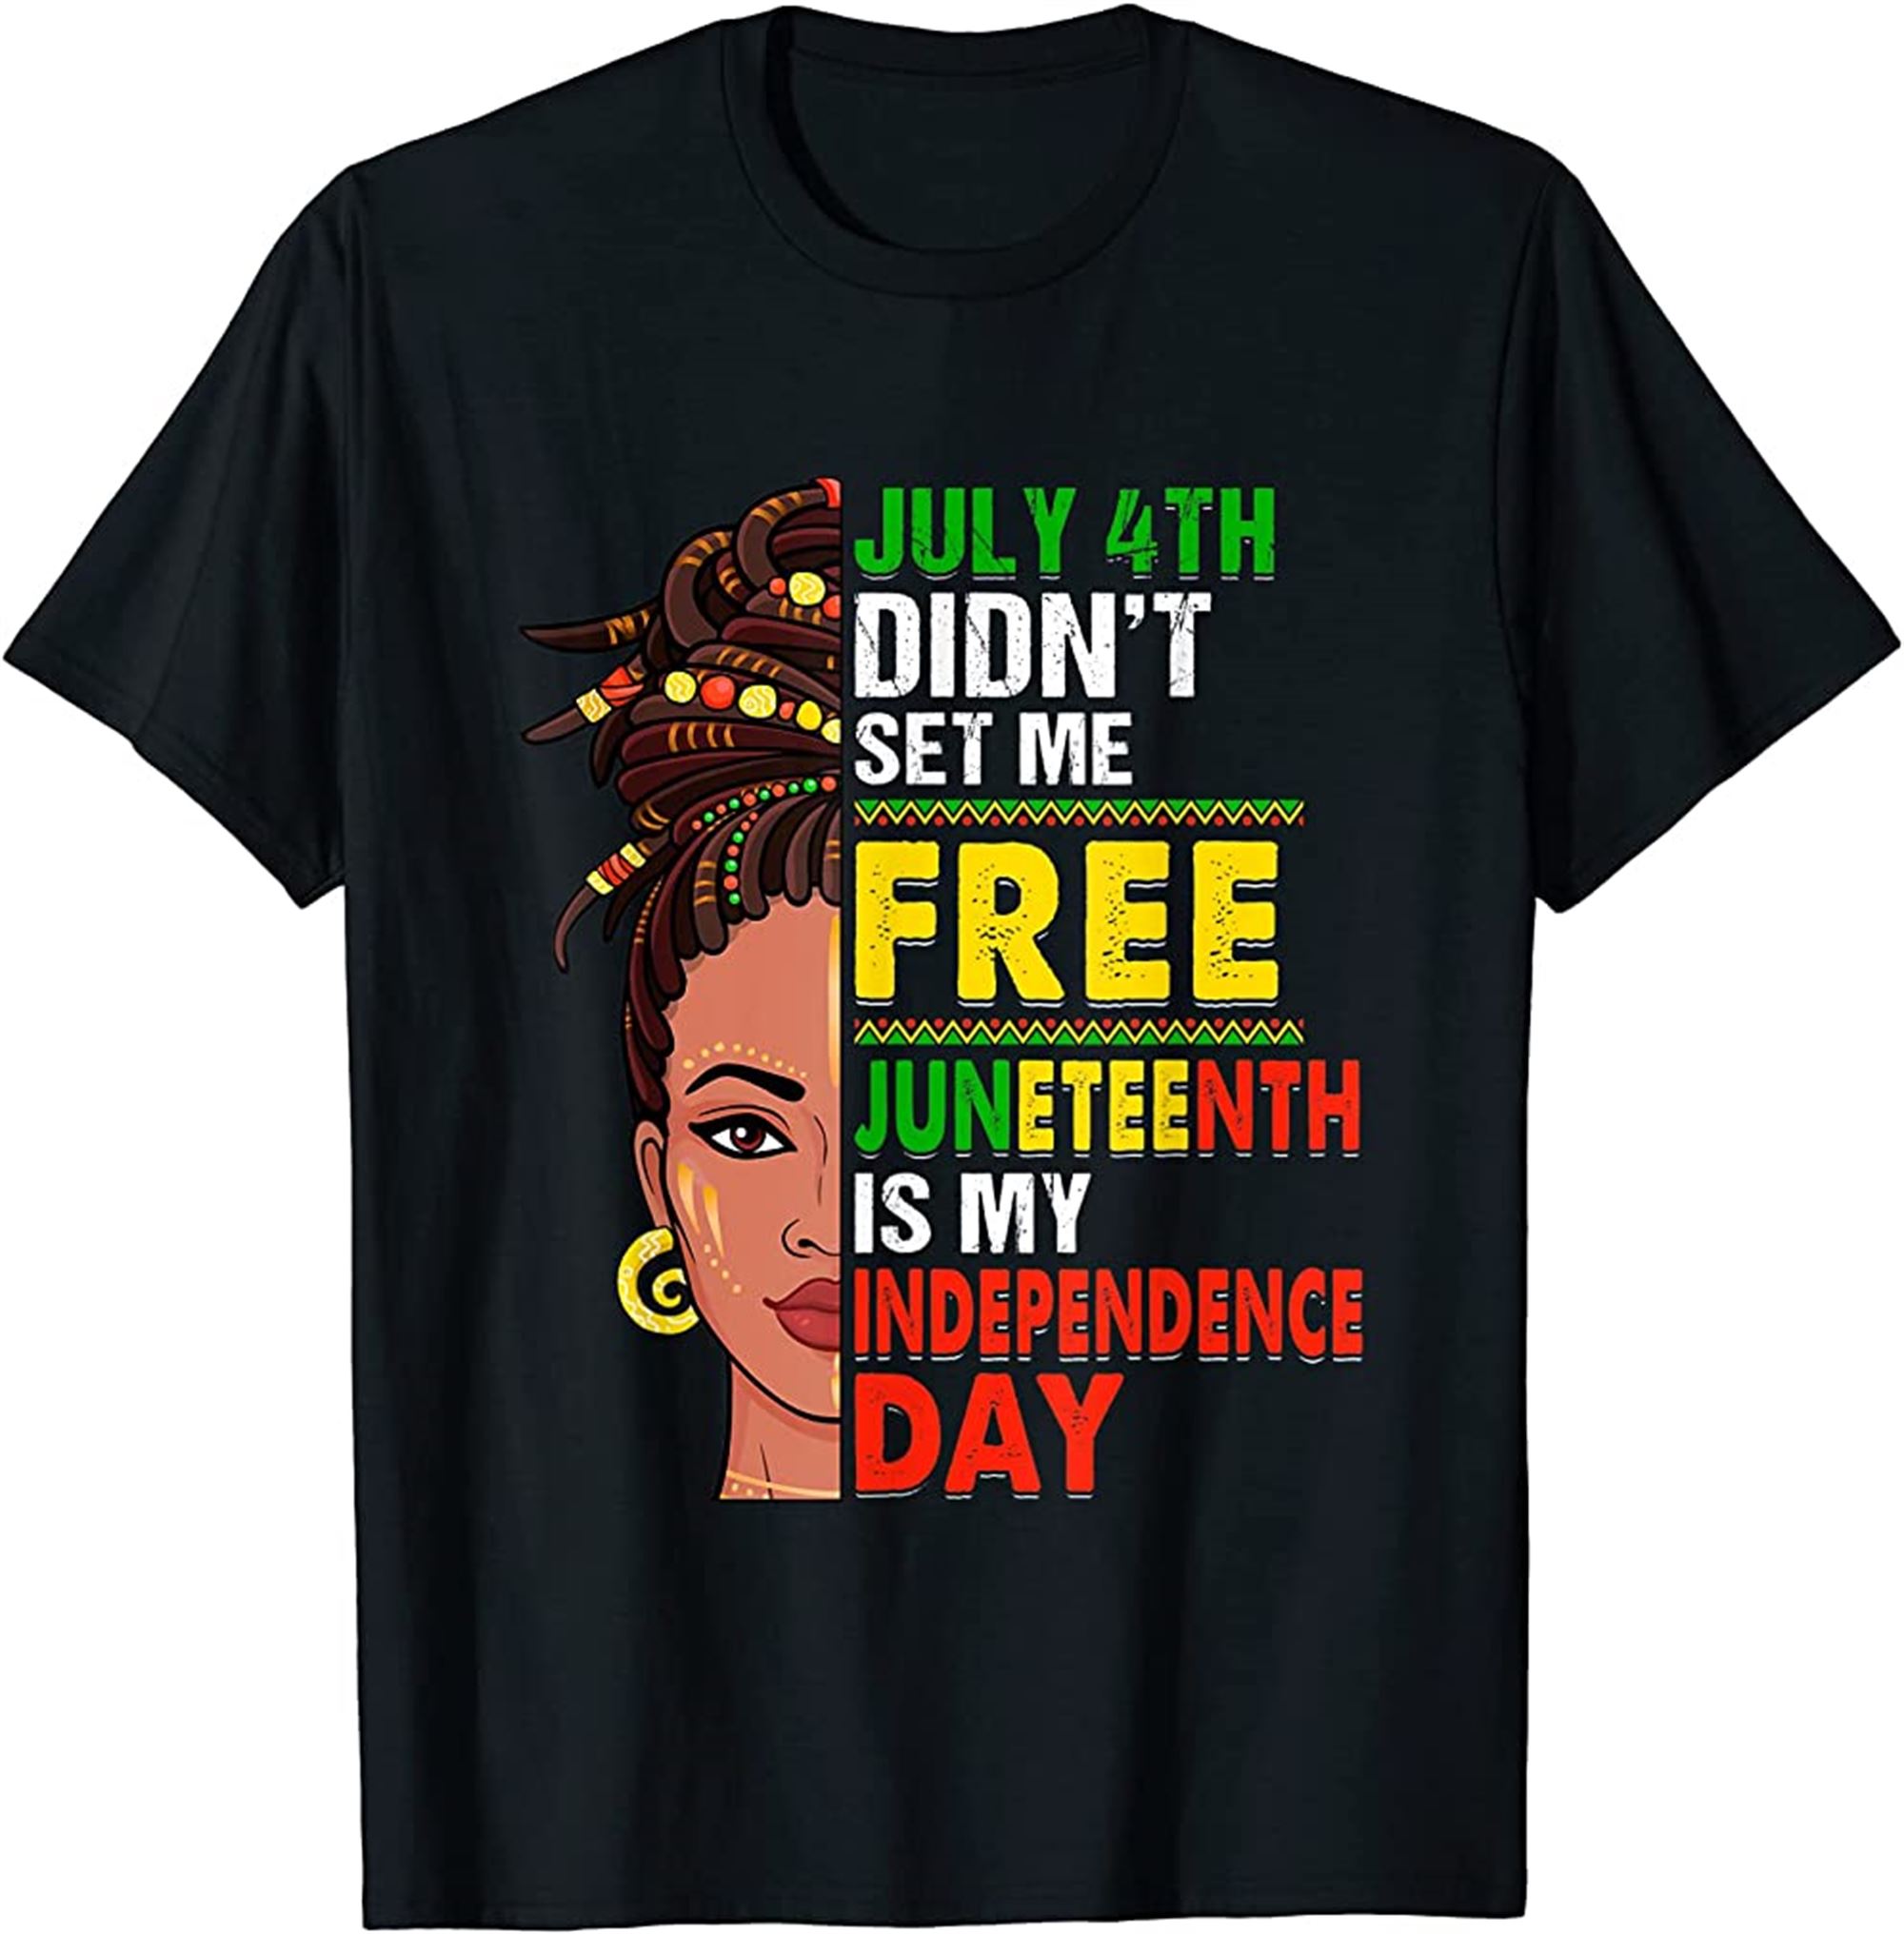 July 4th Didnt Set Me Free Juneteenth Is My Independence Day T-shirt Plus Size Up To 5xl